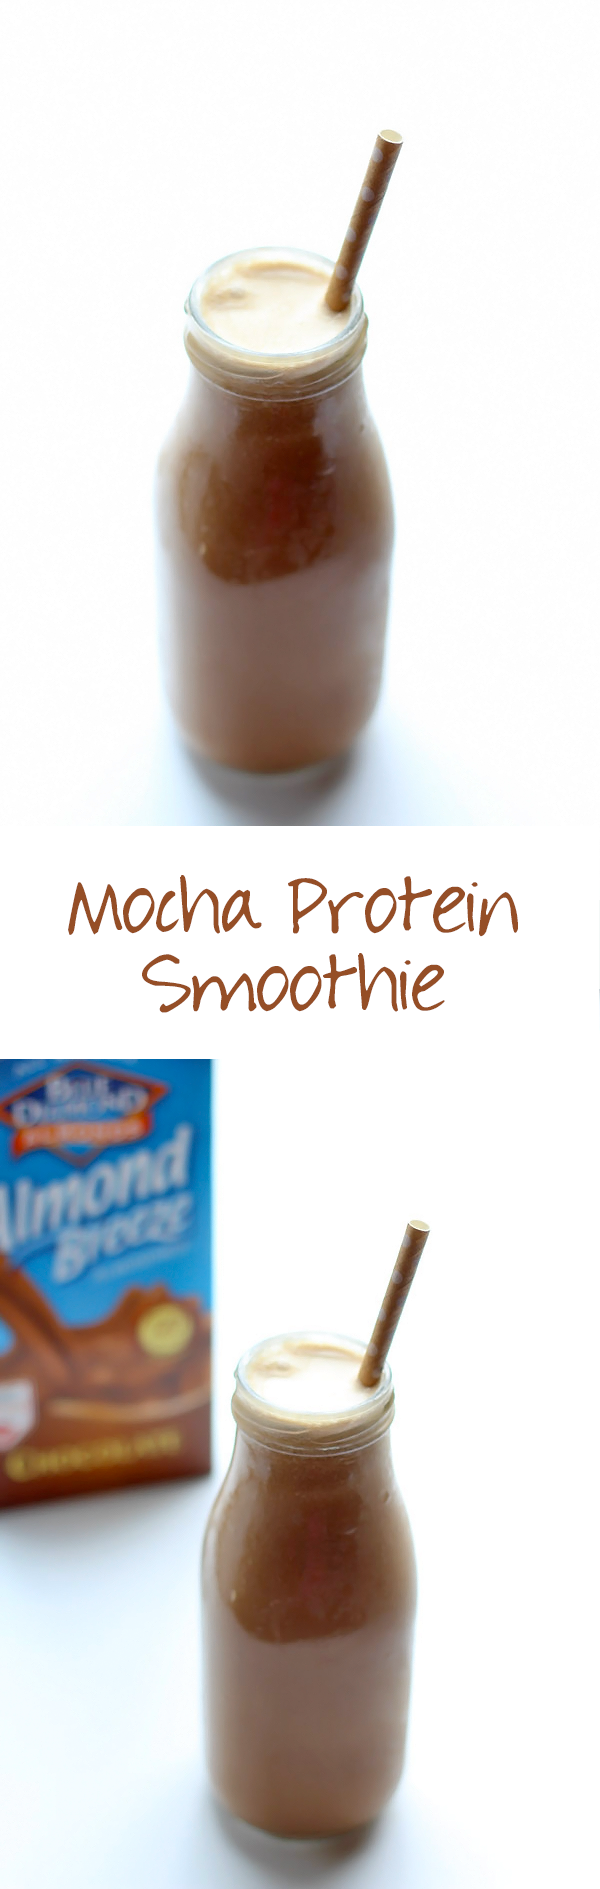 Mocha Protein Smoothie - a cool, creamy way to get your caffeine fix!